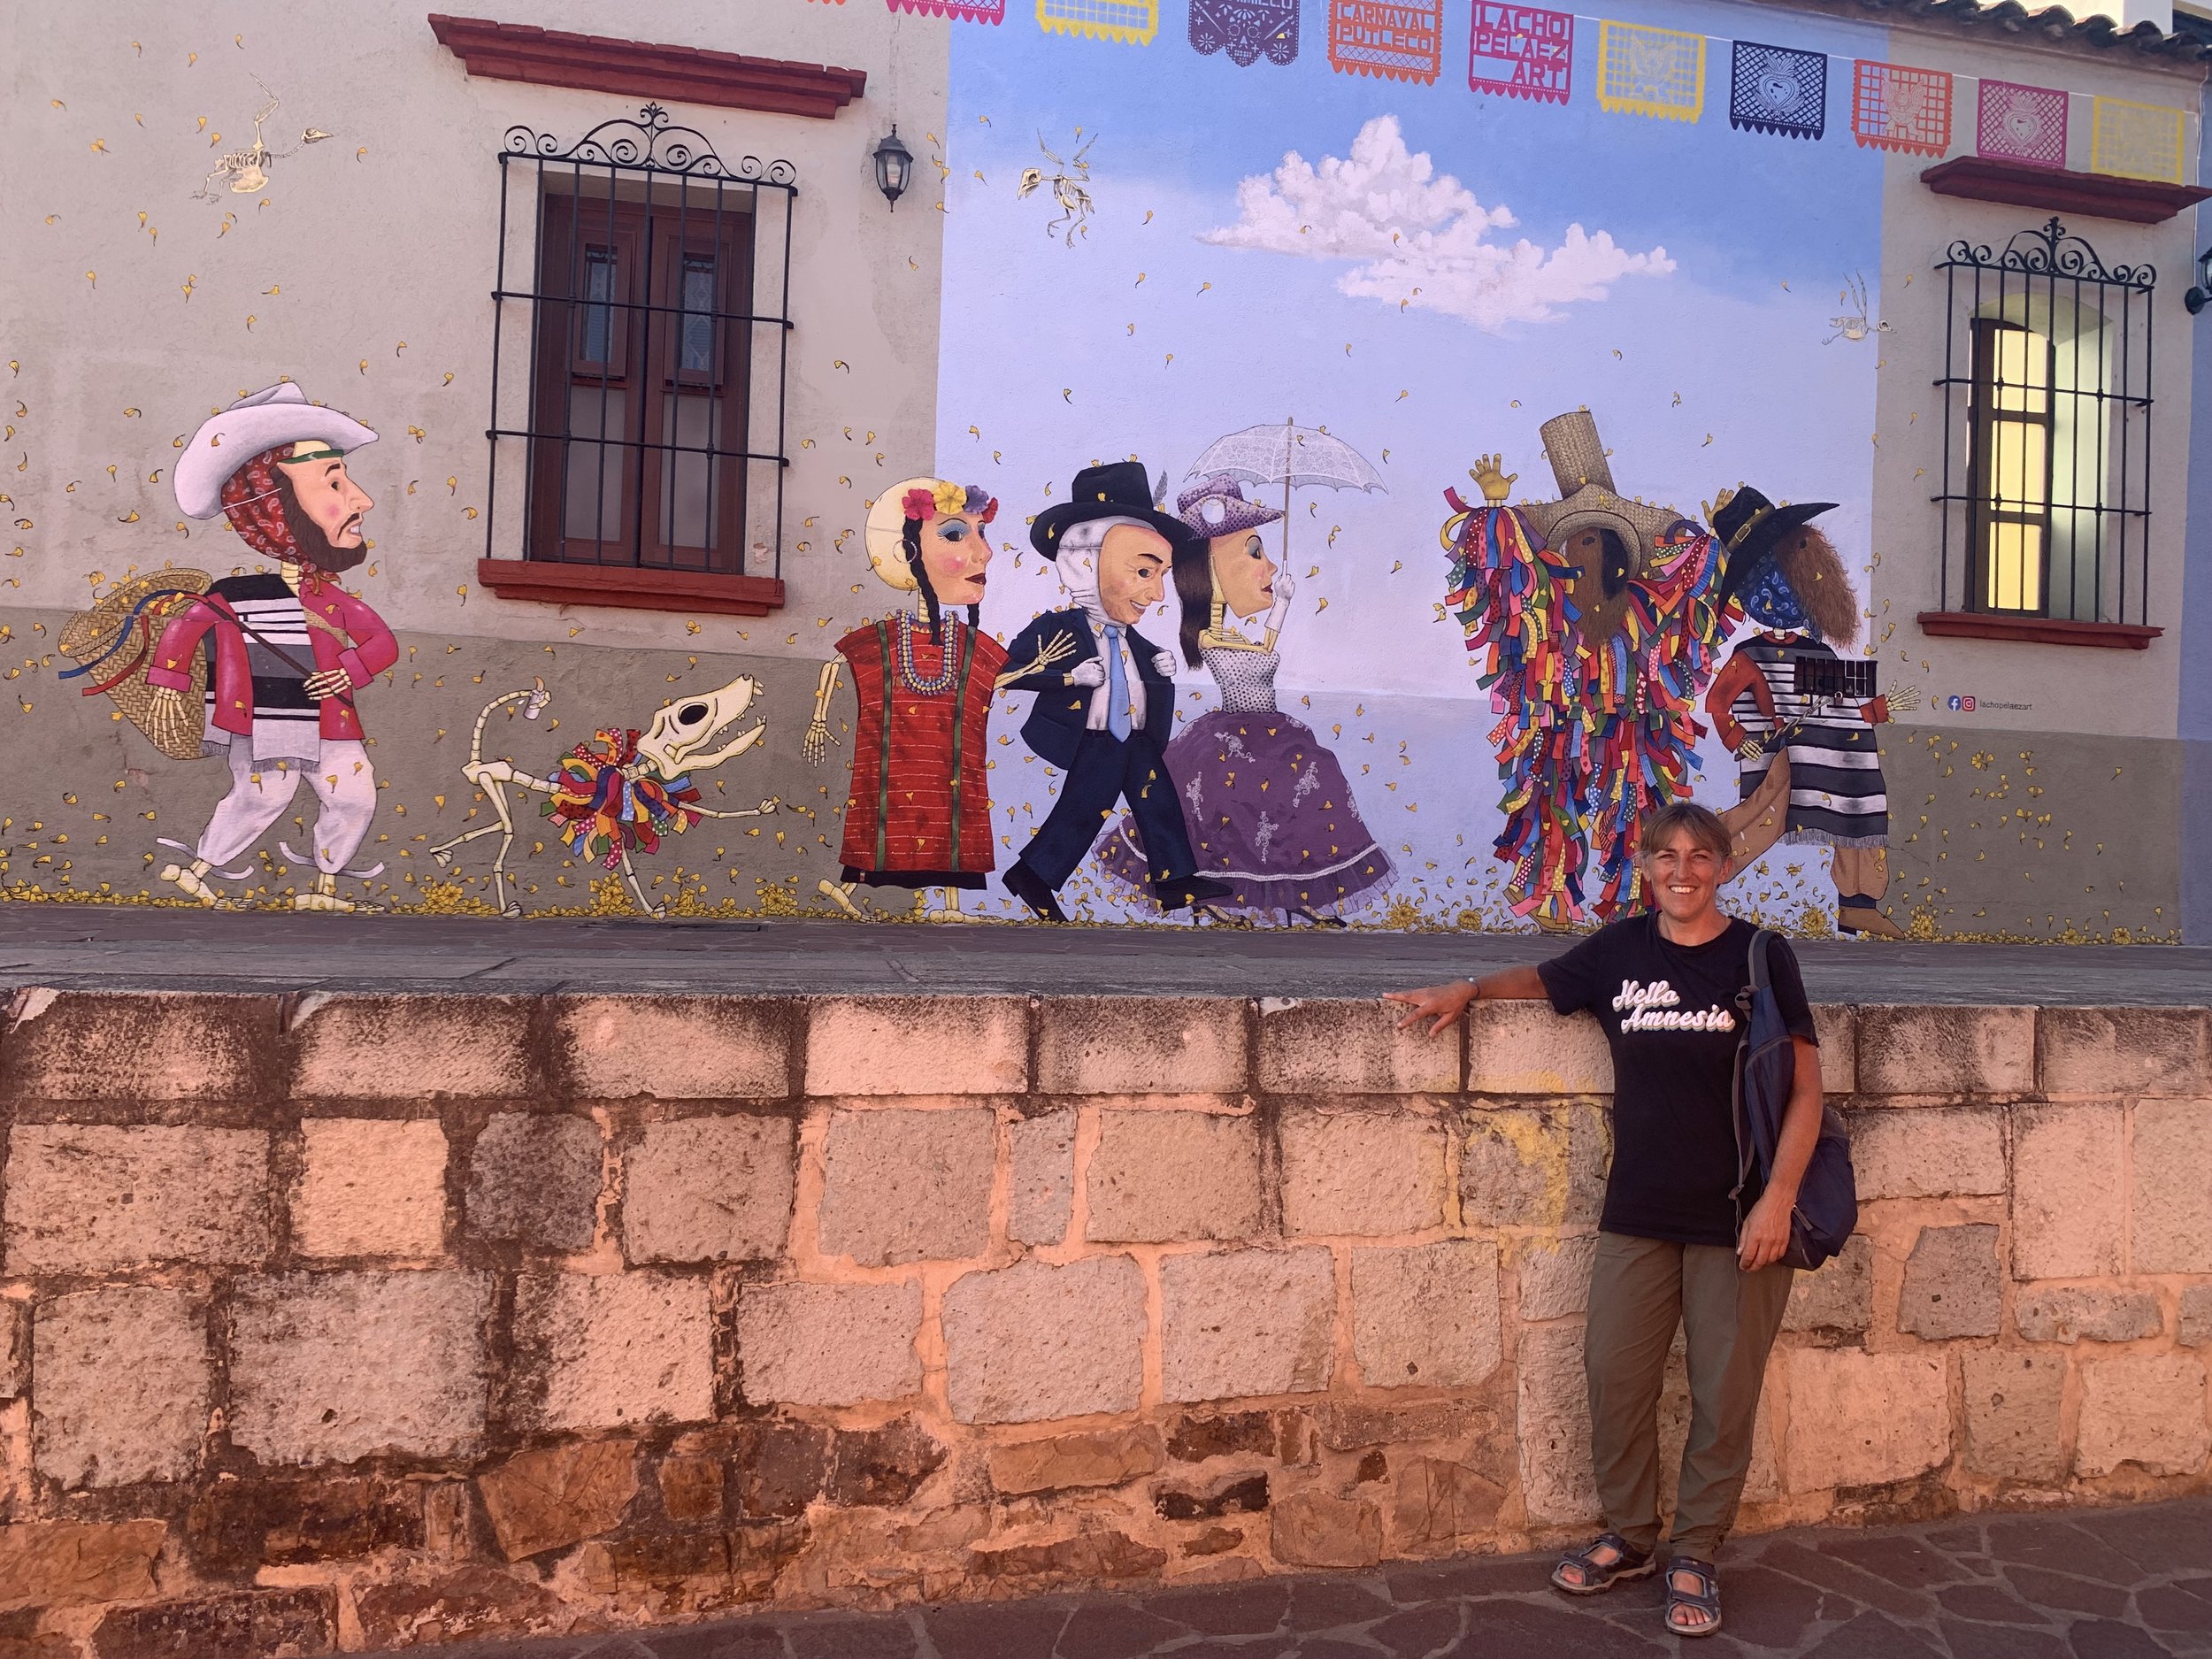  Carla is standing in front of a brightly painted mural in Mexico that shows a parade of skeletons wearing fancy clothing and masks. She is wearing a black t-shirt with ‘Hello Amnesia’ written on it and khaki pants and is smiling.  